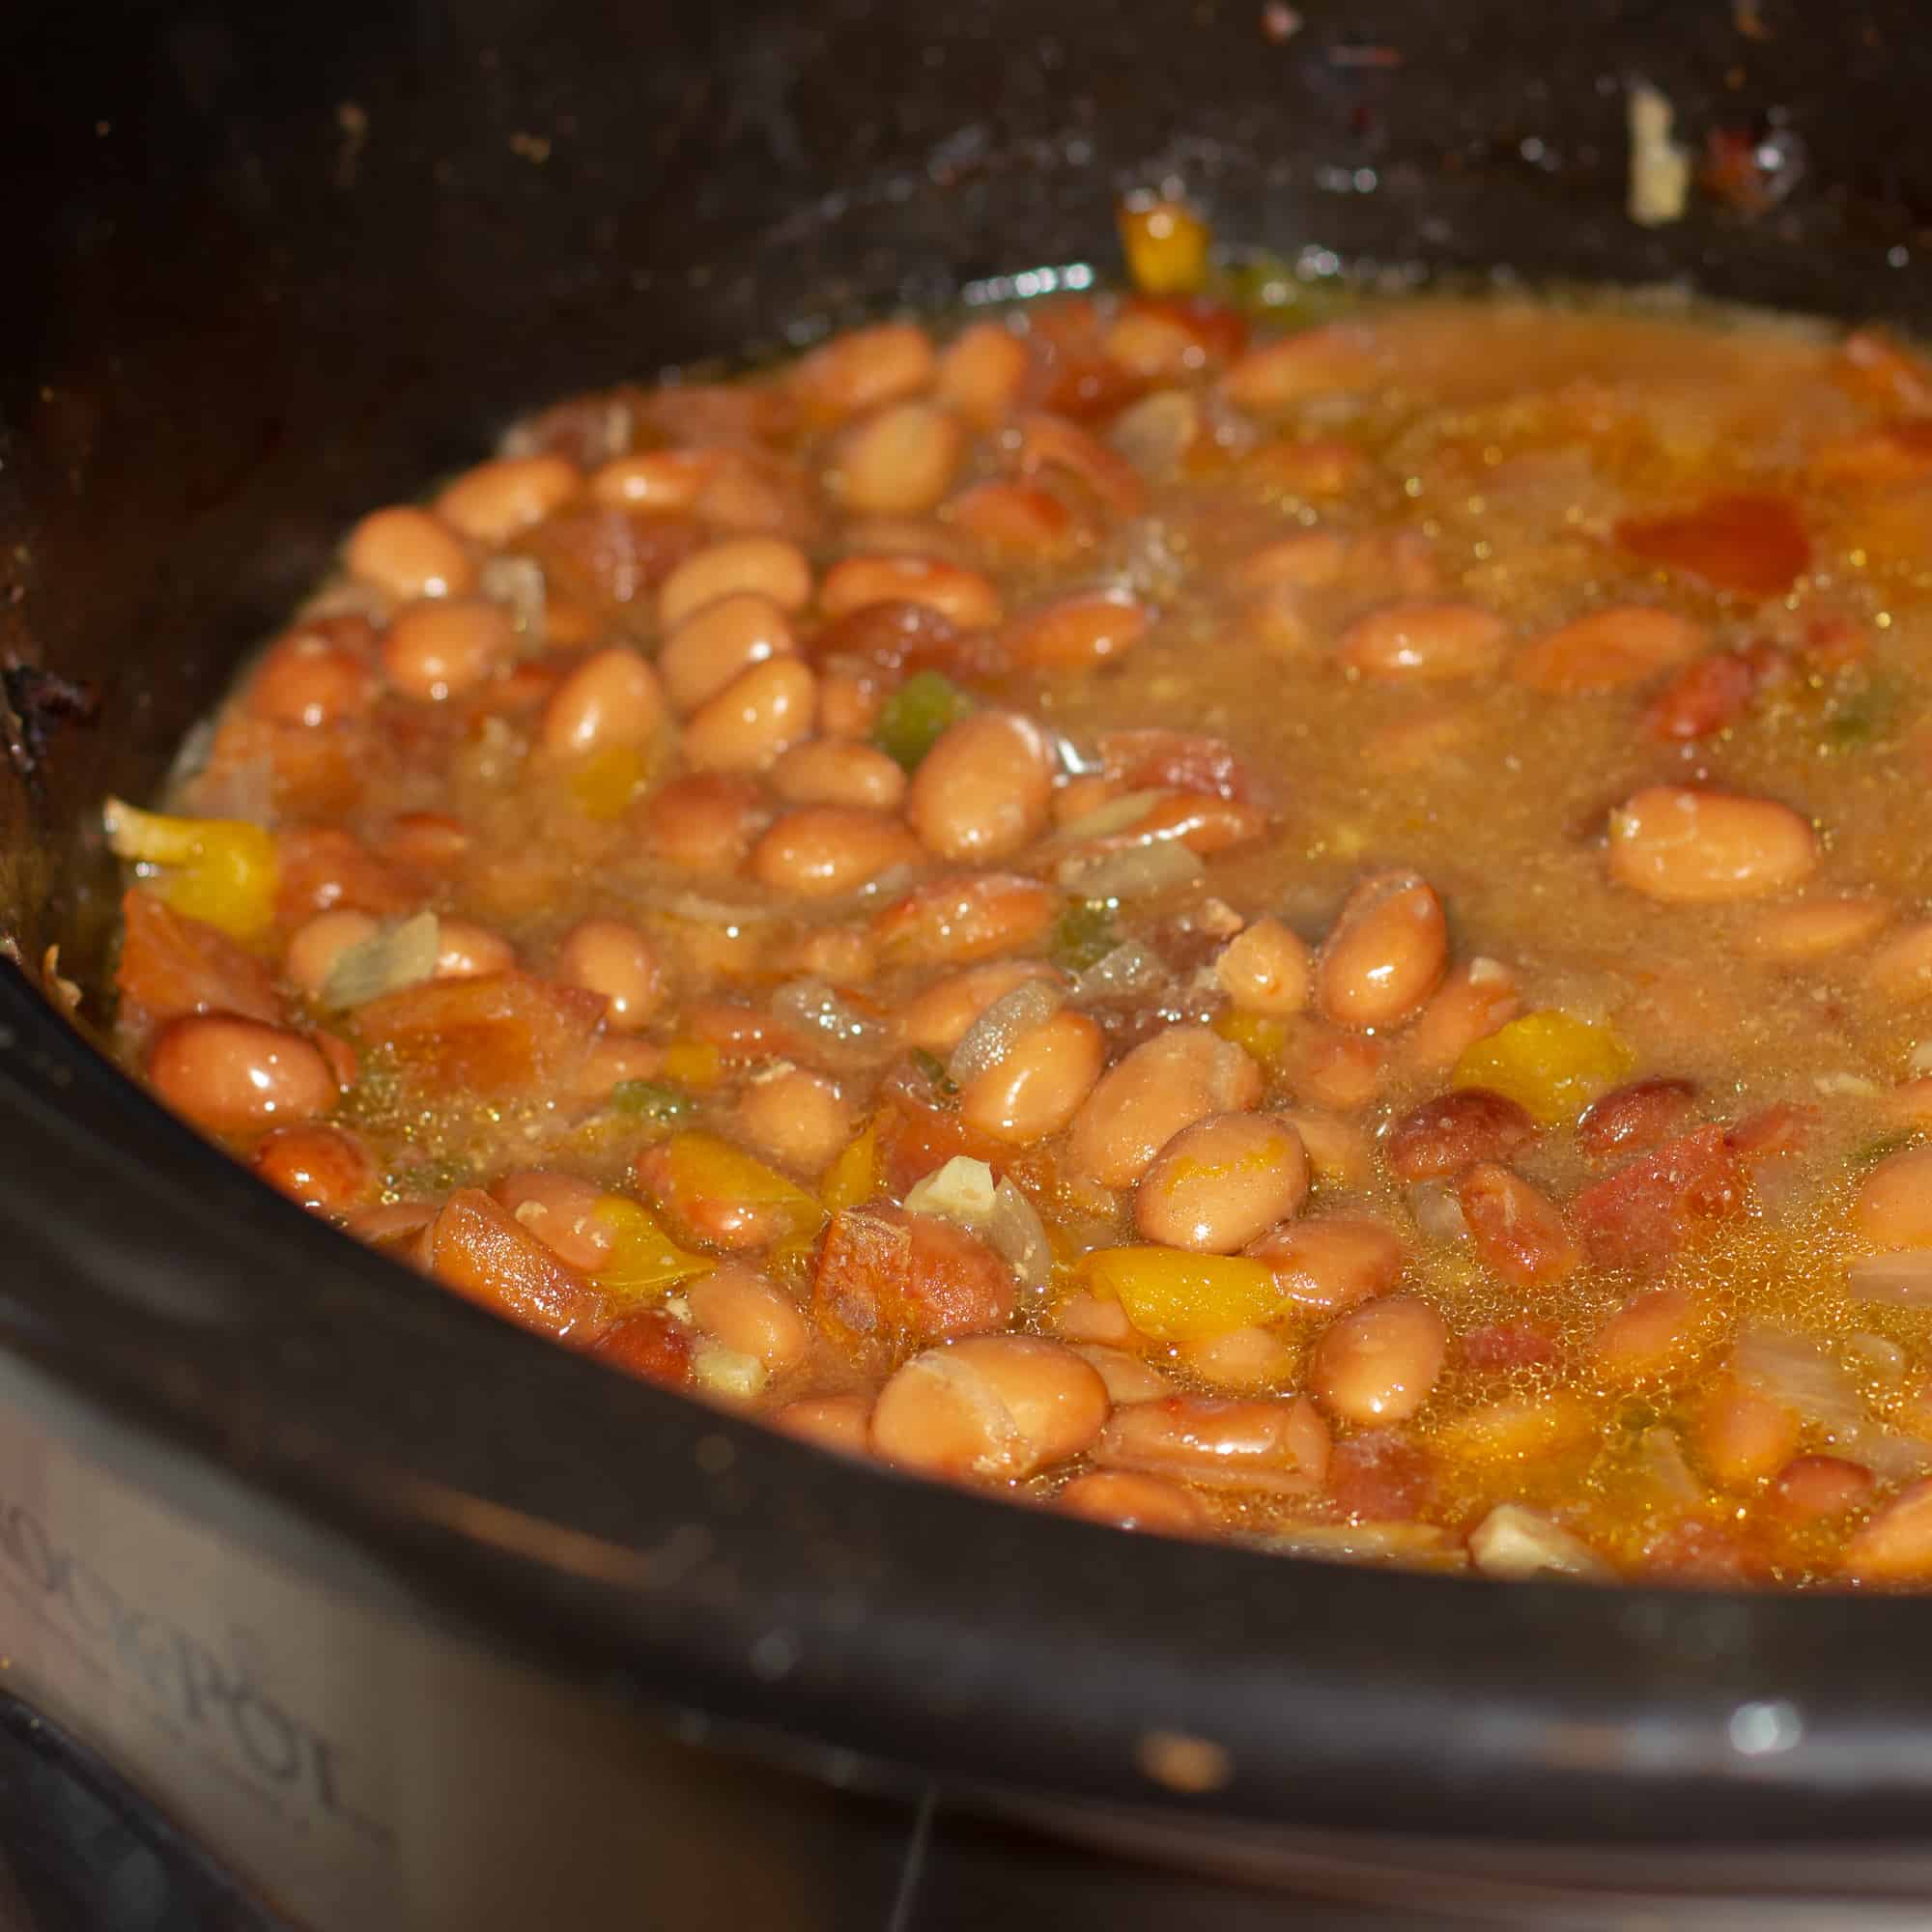 Slow cooked pinto beans with ham hock, tomato, onion, jalapeno and ancho chilies. Amazing tex-mex / Mexican comfort food baked bean recipe made in a Crock Pot.